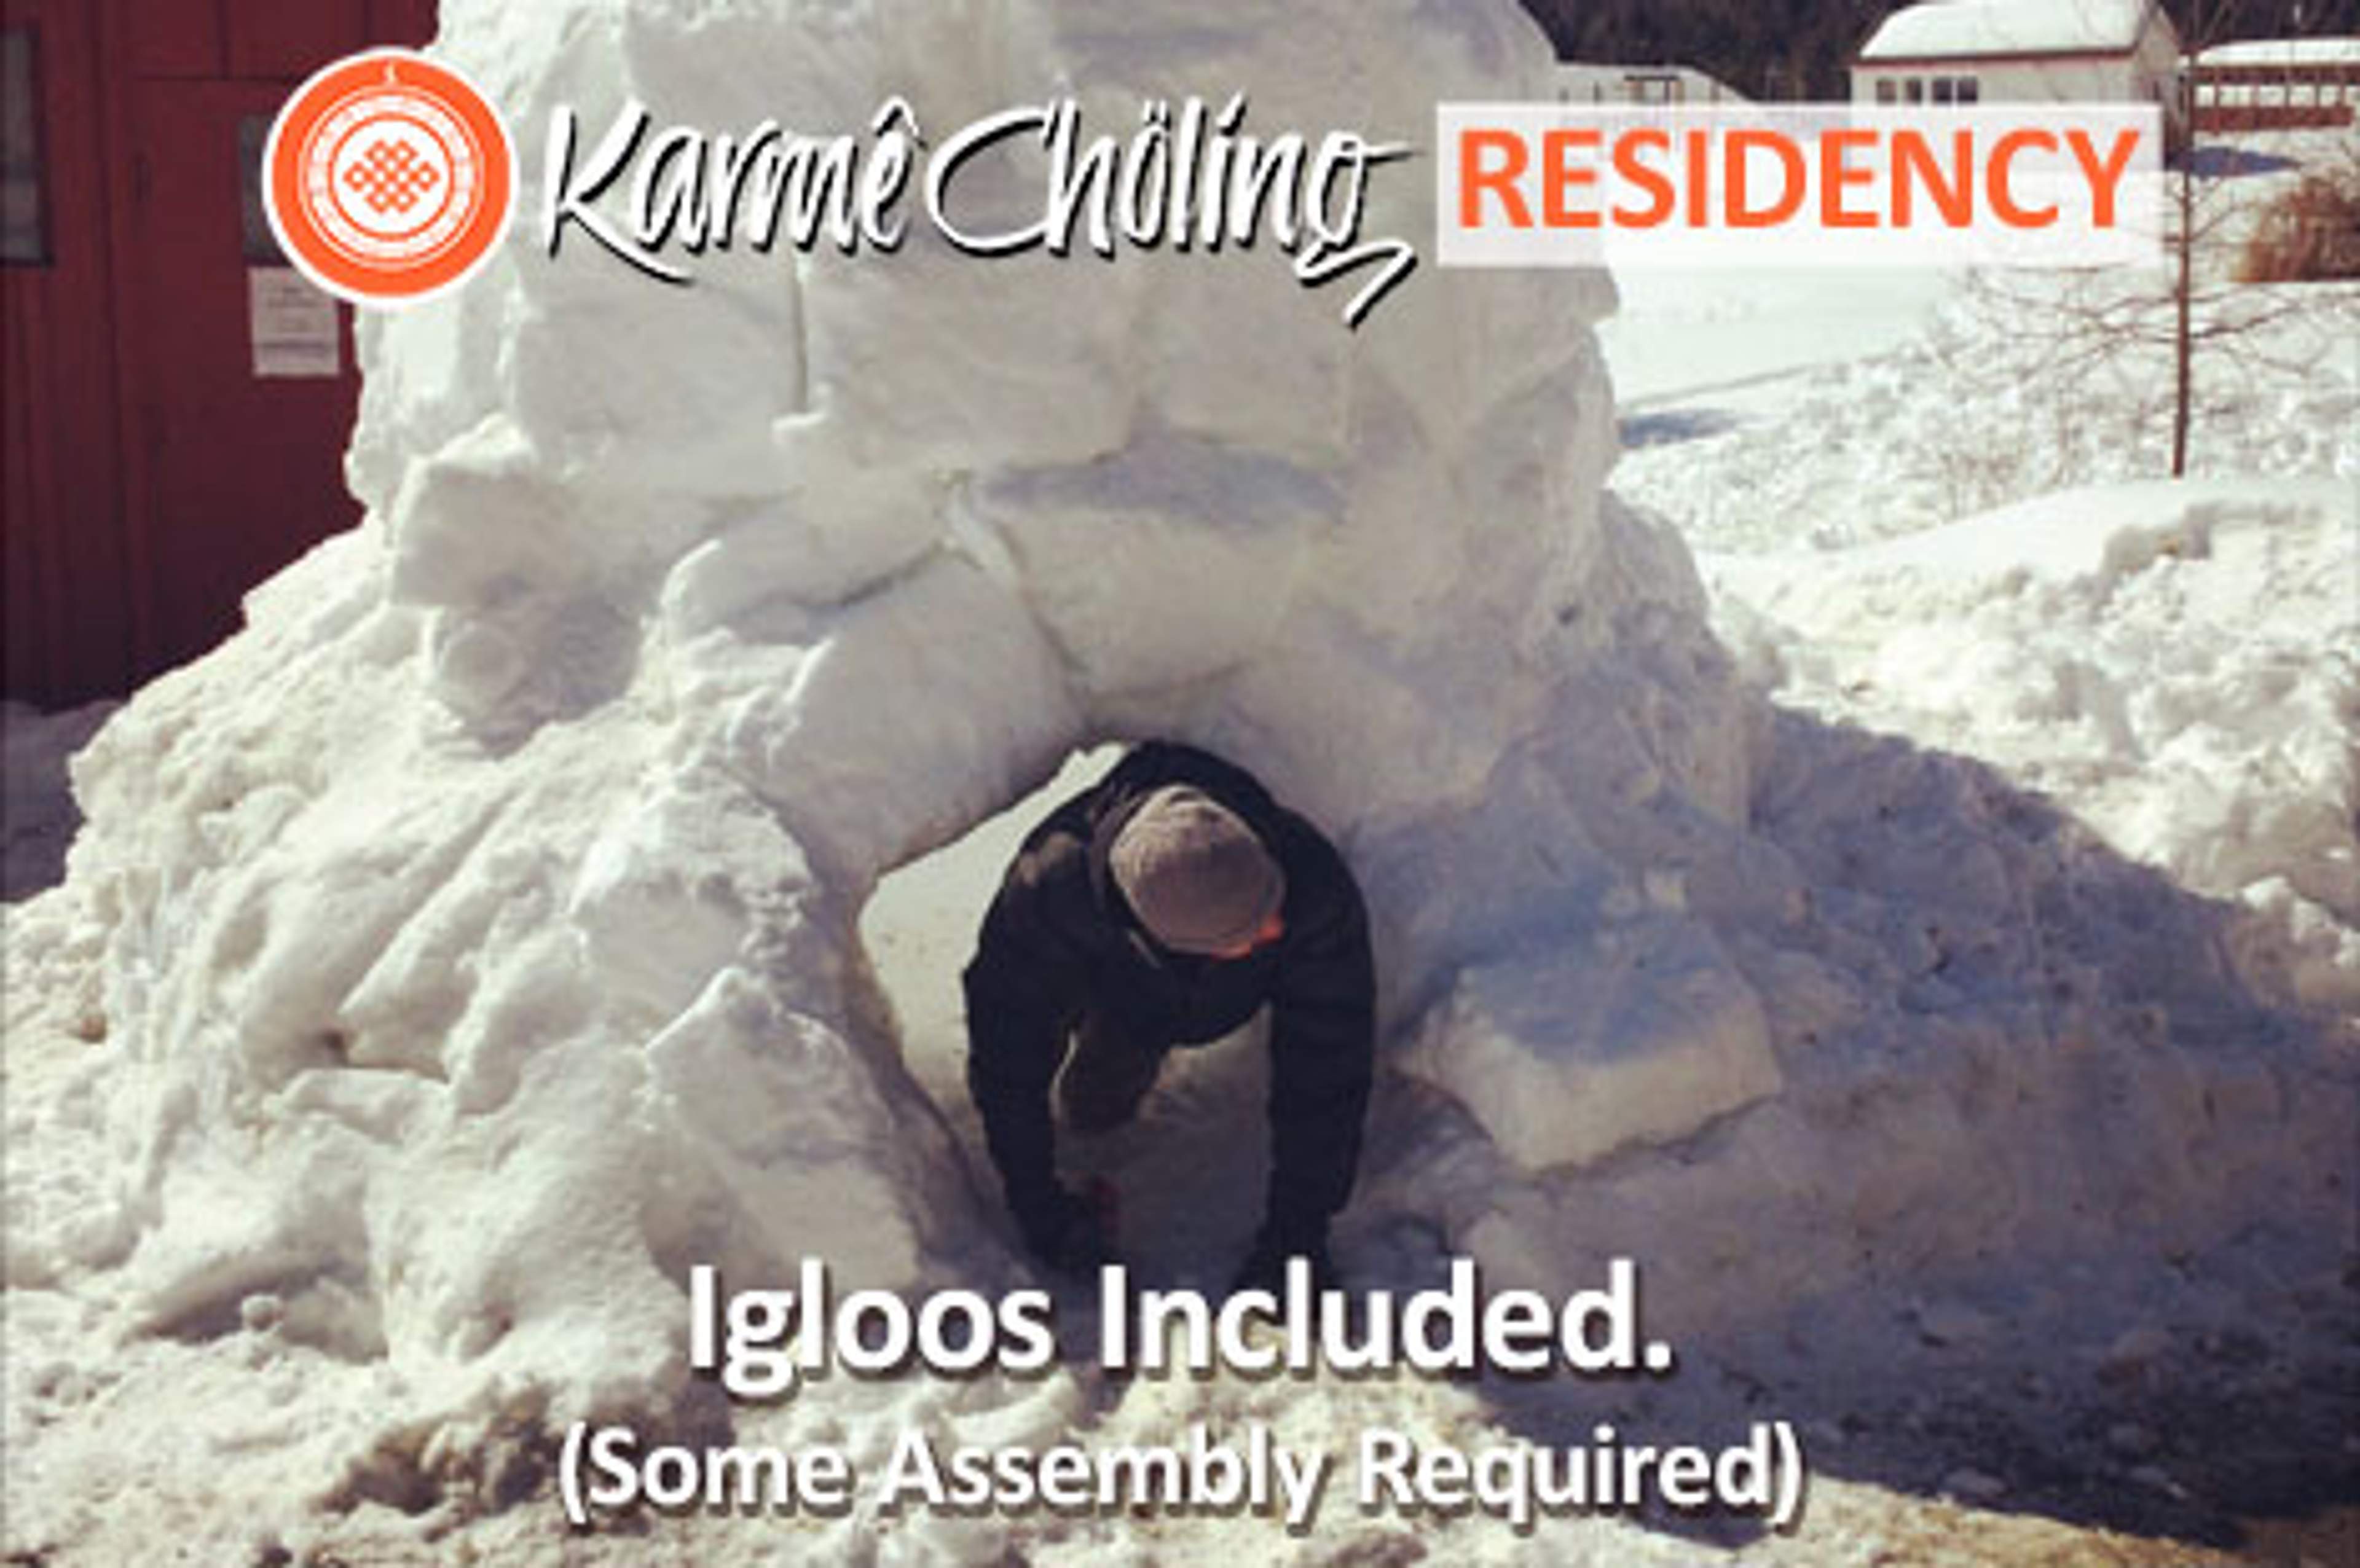 Igloos included